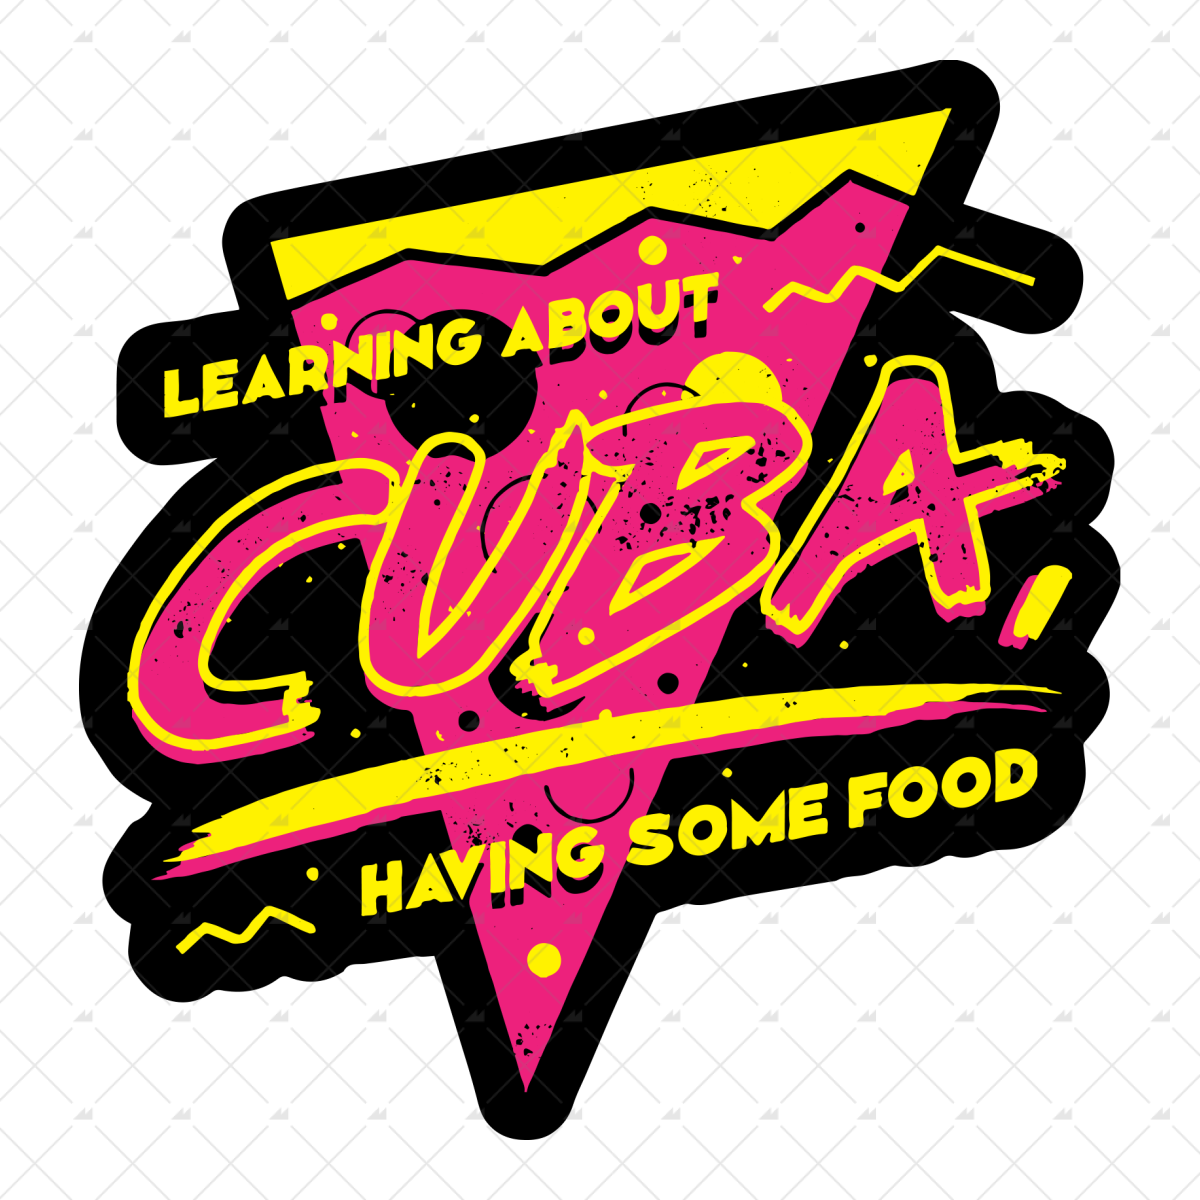 Learning About Cuba Having Some Food - Sticker